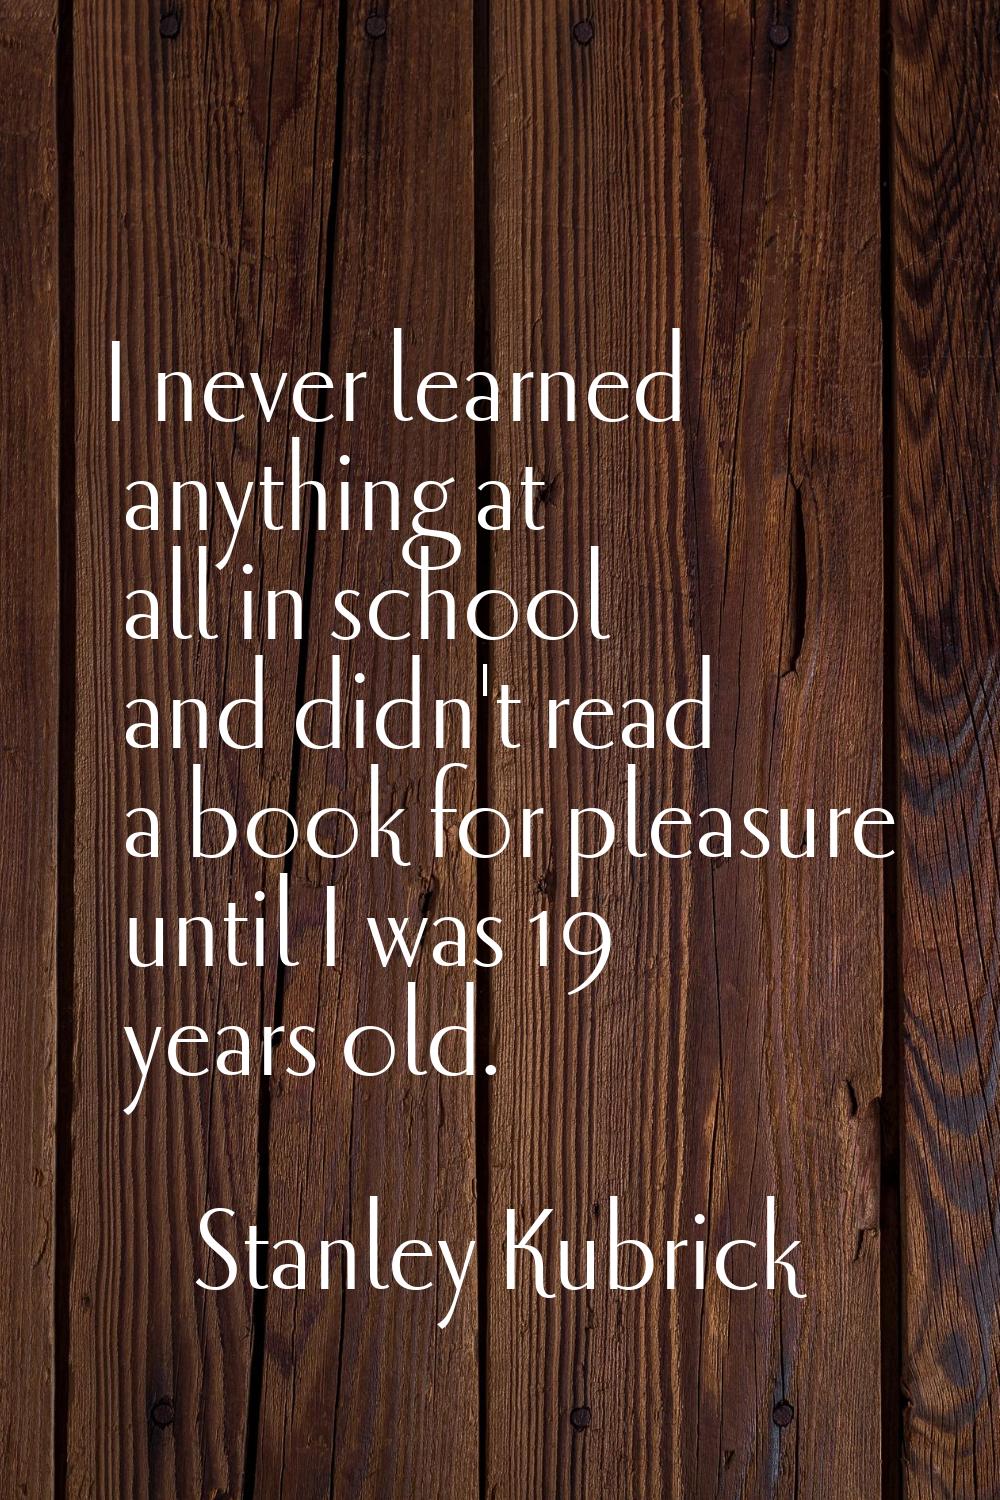 I never learned anything at all in school and didn't read a book for pleasure until I was 19 years 